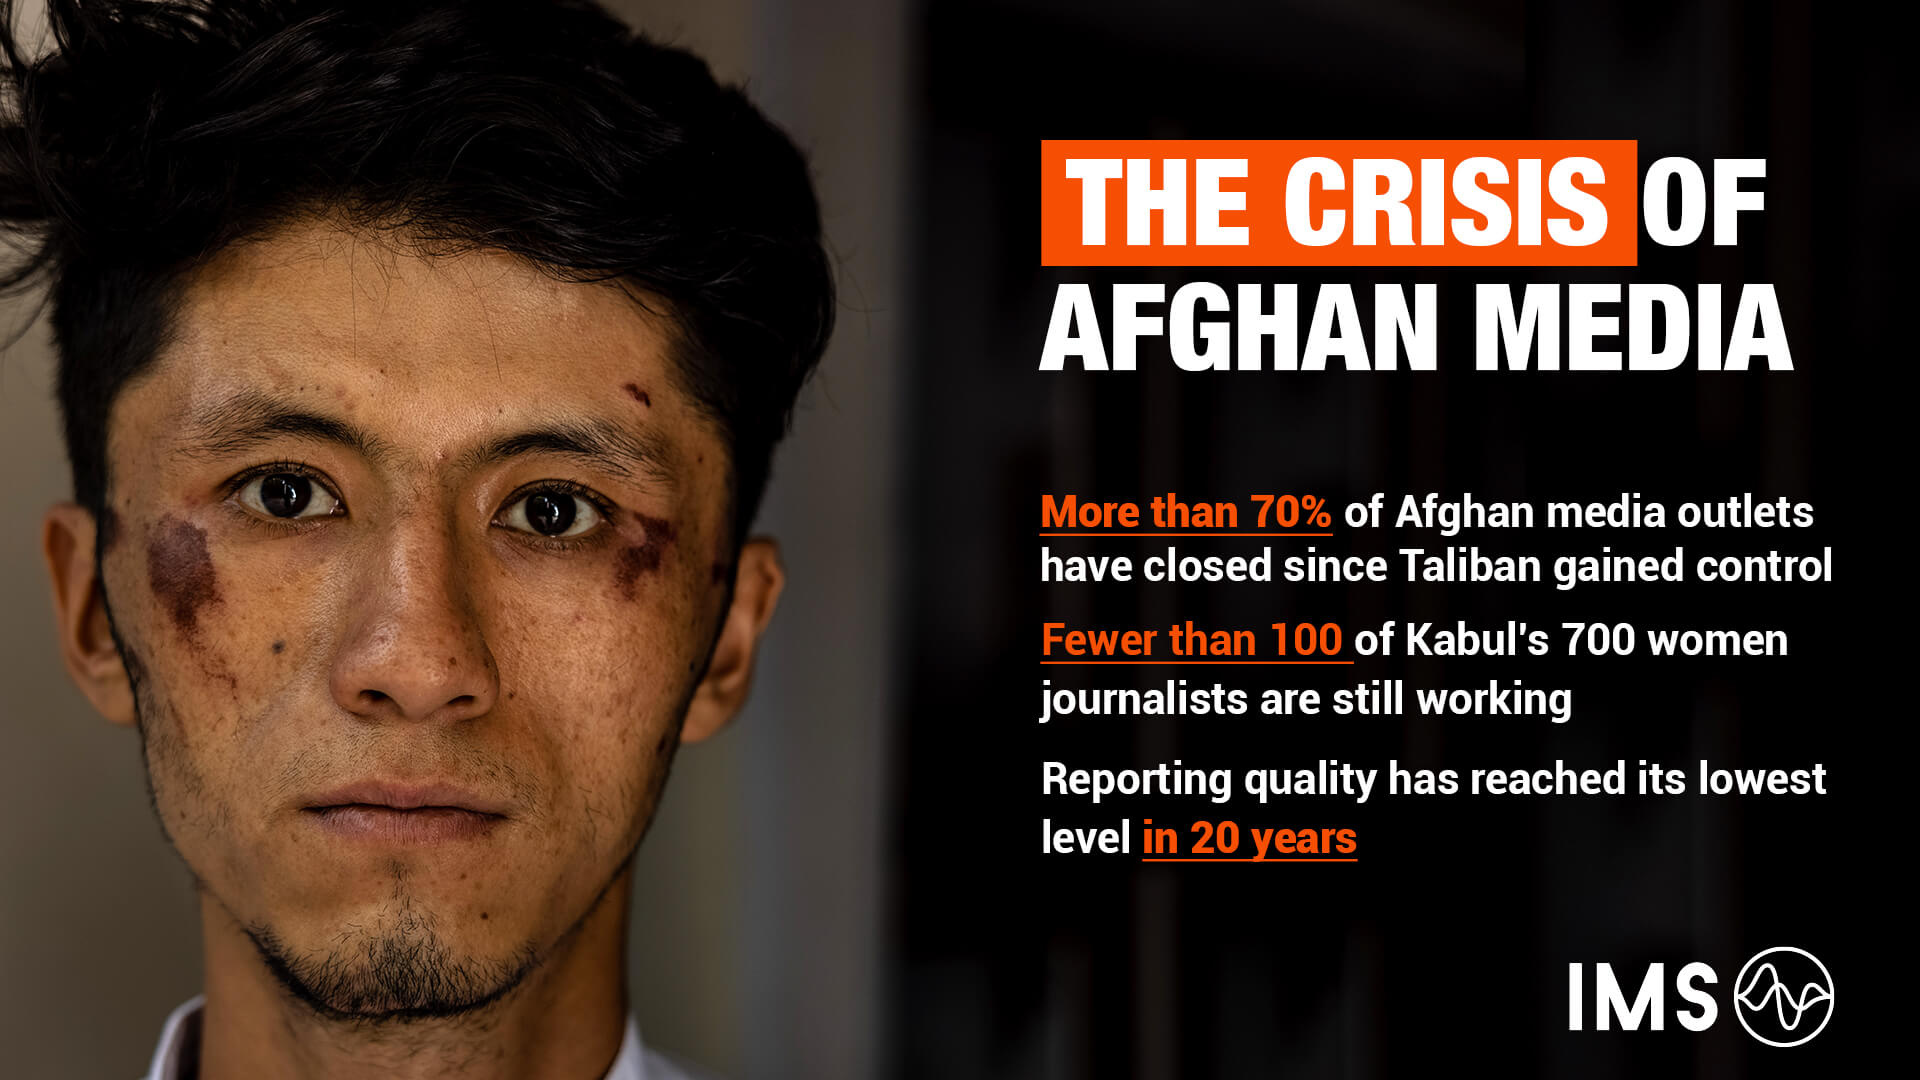 Crisis of Afghan media: More than 70% of Afghan media outlets have closed since the Taliban gained control. Fewer than 100 of Kabul 700 women journalists are still working. Reporting quality has reached its lowest level in 20 years.